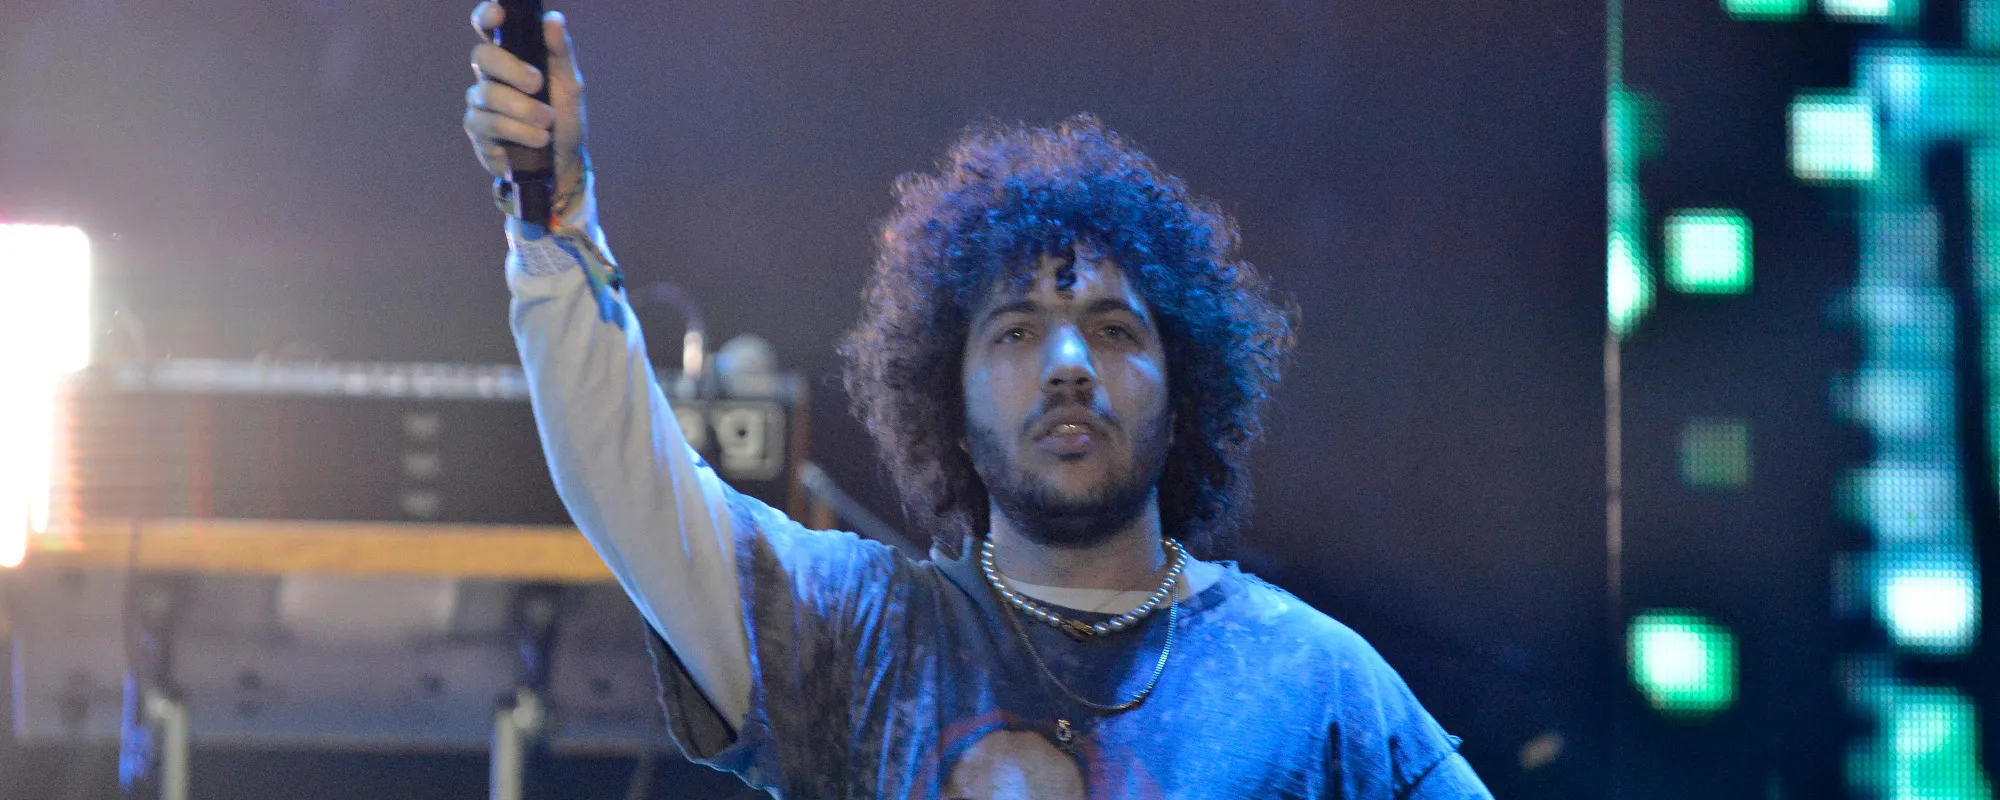 5 Songs You Didn’t Know Benny Blanco Wrote for Other Artists